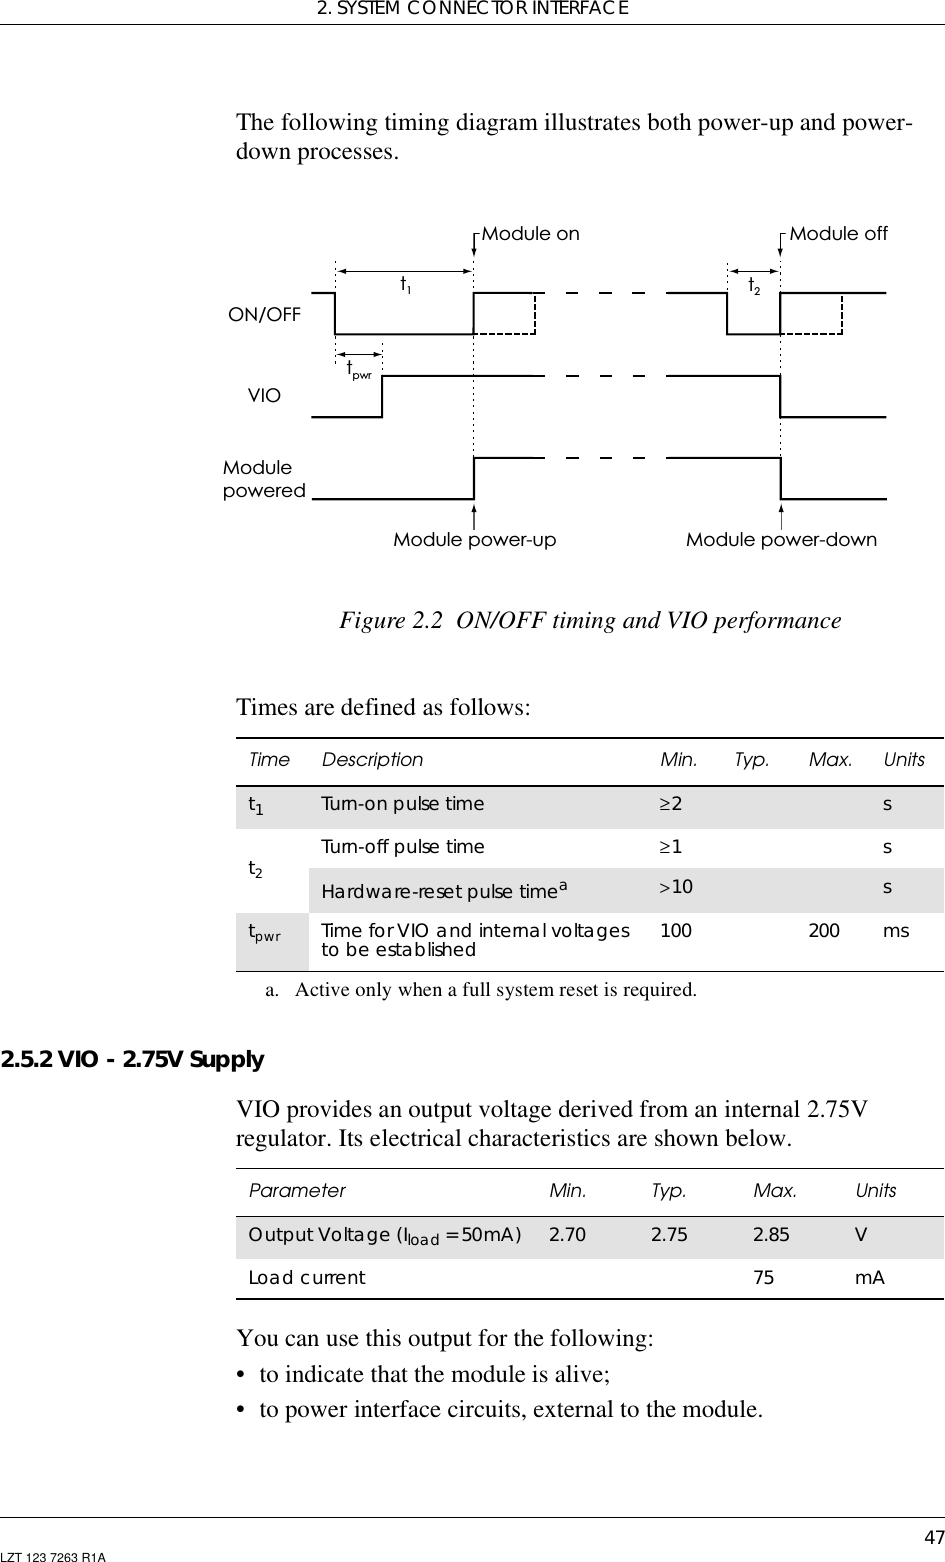 2. SYSTEM CONNECTOR INTERFACE47LZT 123 7263 R1AThe following timing diagram illustrates both power-up and power-down processes.Figure 2.2 ON/OFF timing and VIO performanceTimes are defined as follows:2.5.2 VIO - 2.75V SupplyVIO provides an output voltage derived from an internal 2.75Vregulator. Its electrical characteristics are shown below.You can use this output for the following:• to indicate that the module is alive;• to power interface circuits, external to the module.ON/OFFVIOModulepoweredt1t2tpwrModule power-up Module power-downModule on Module offTime Description Min. Typ. Max. Unitst1Turn-on pulse time ≥2 st2Turn-off pulse time ≥1 sHardware-reset pulse timeaa. Active only when a full system reset is required.&gt;10 stpwr Time for VIO and internal voltagesto be established 100 200 msParameter Min. Typ. Max. UnitsOutput Voltage (Iload =50mA) 2.70 2.75 2.85 VLoad current 75 mA